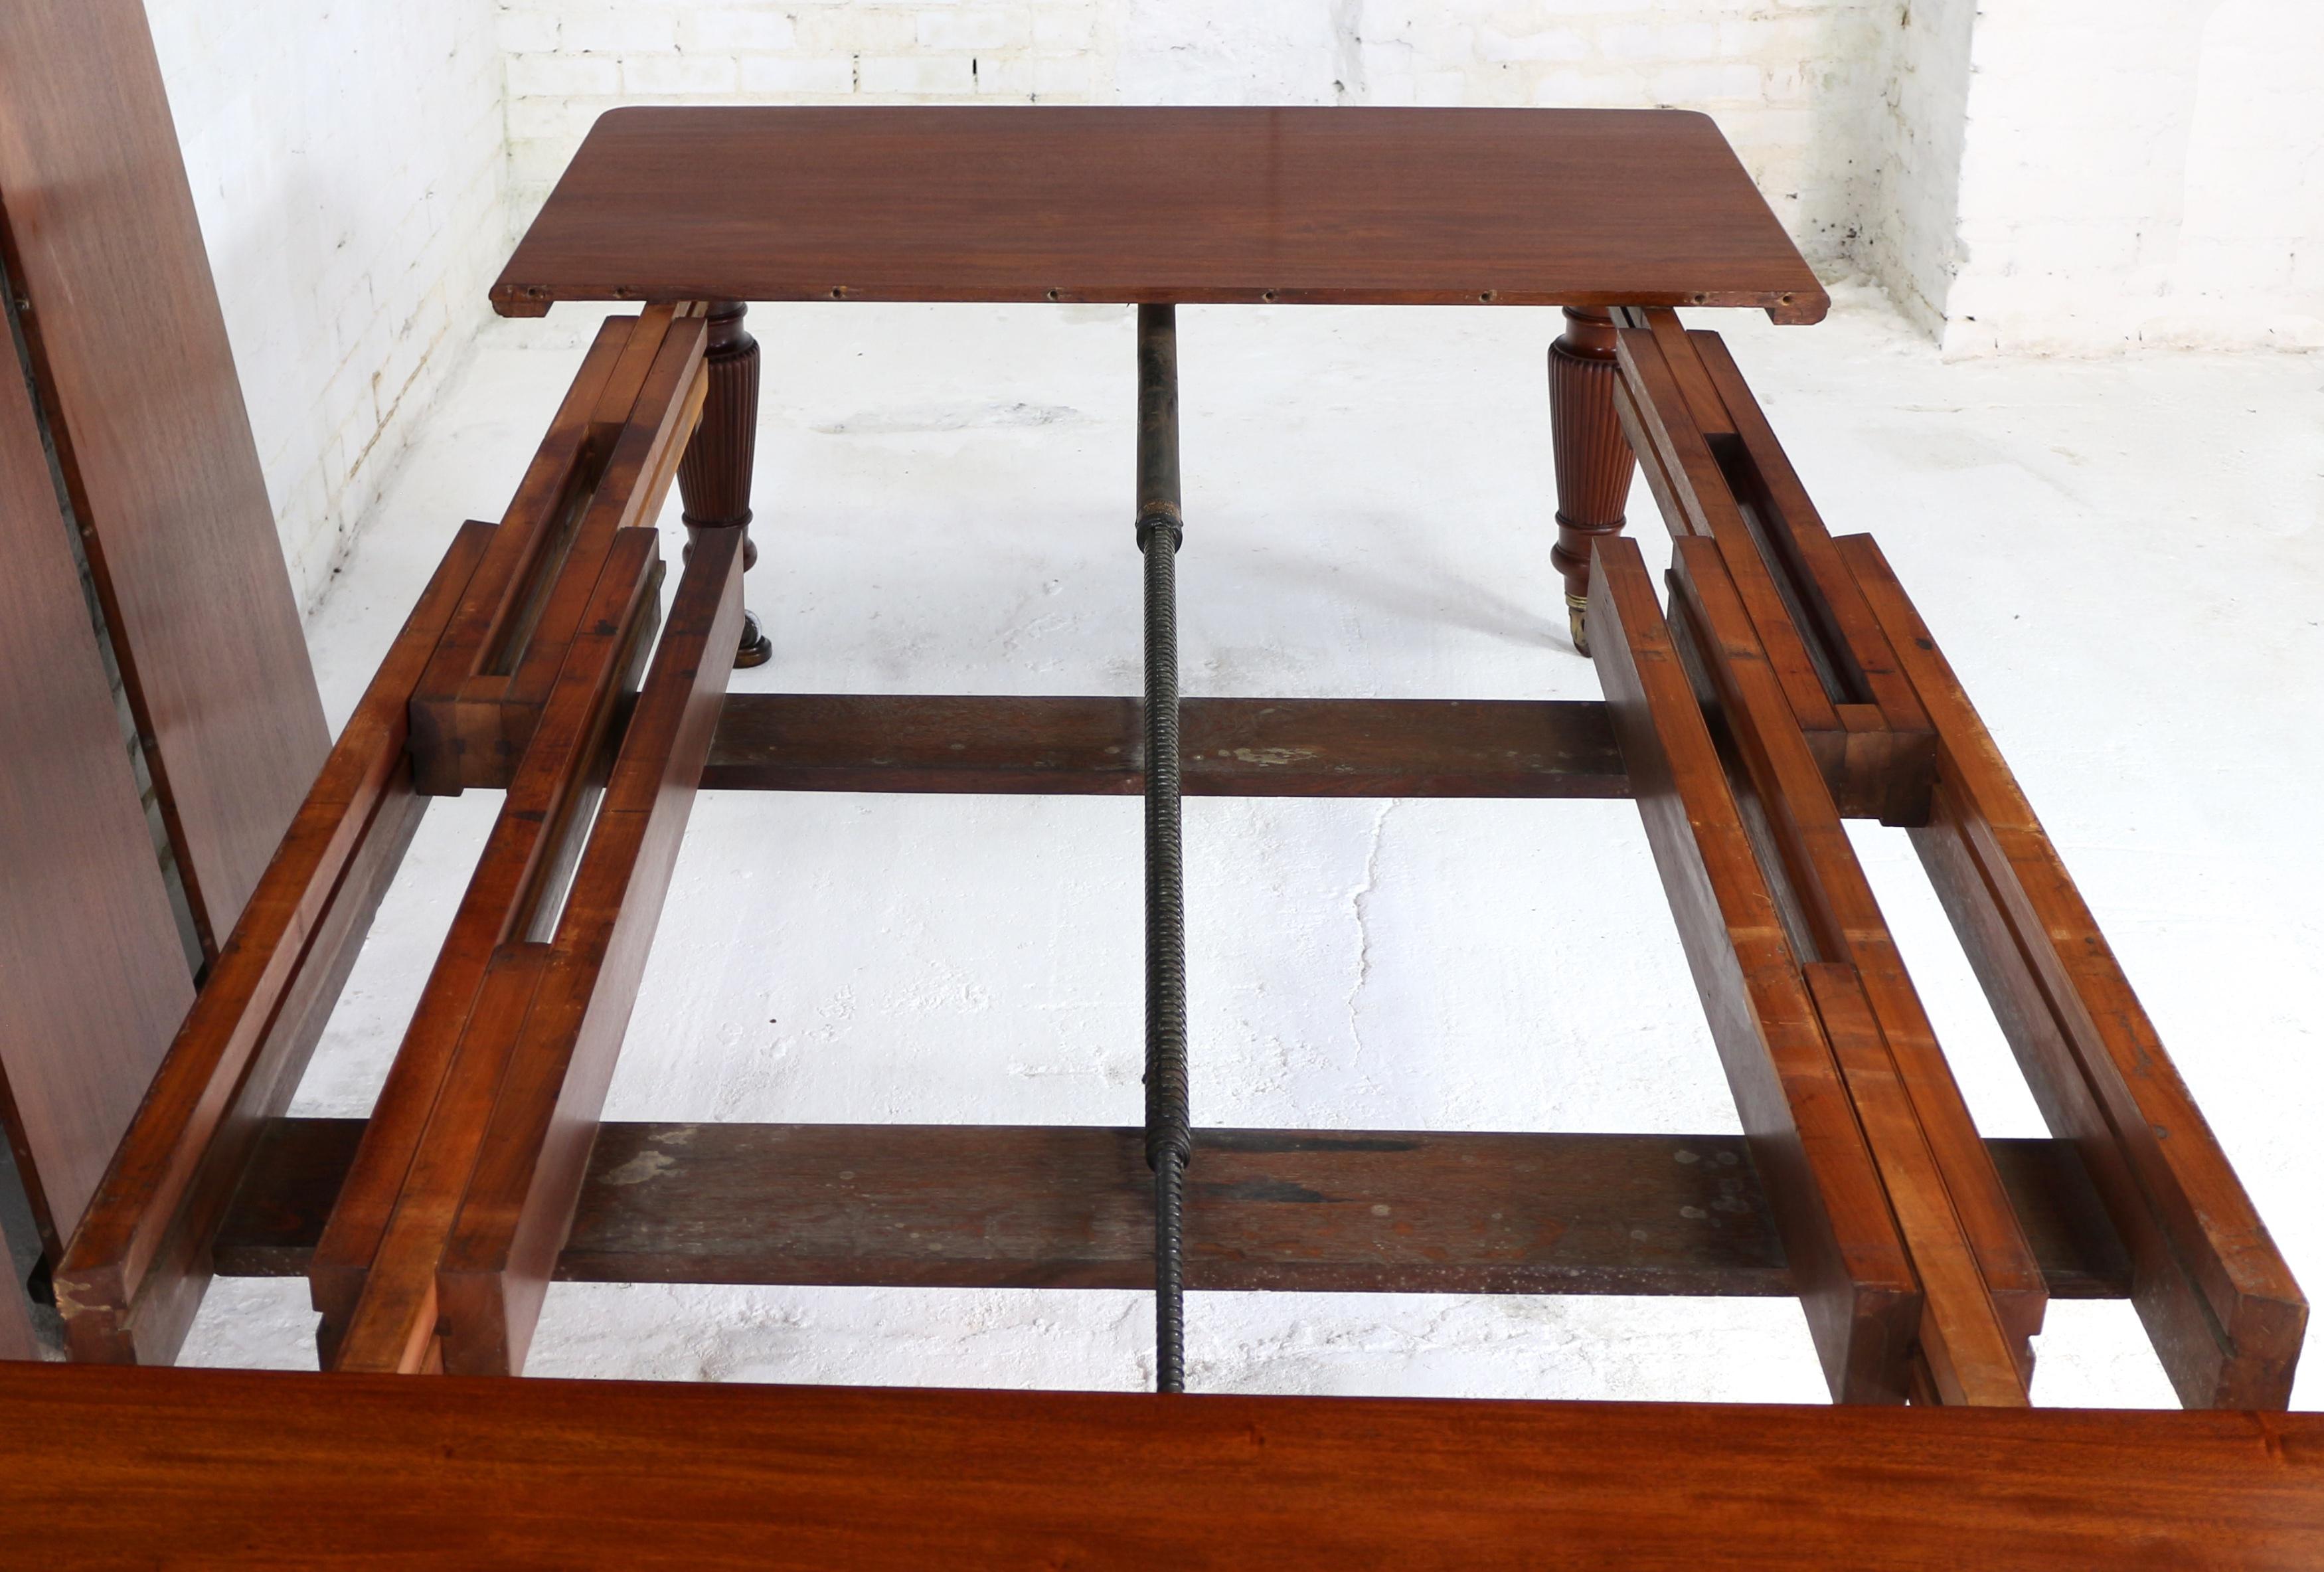 19th Century Antique English Victorian Mahogany Extending Dining Table & 4 Leaves